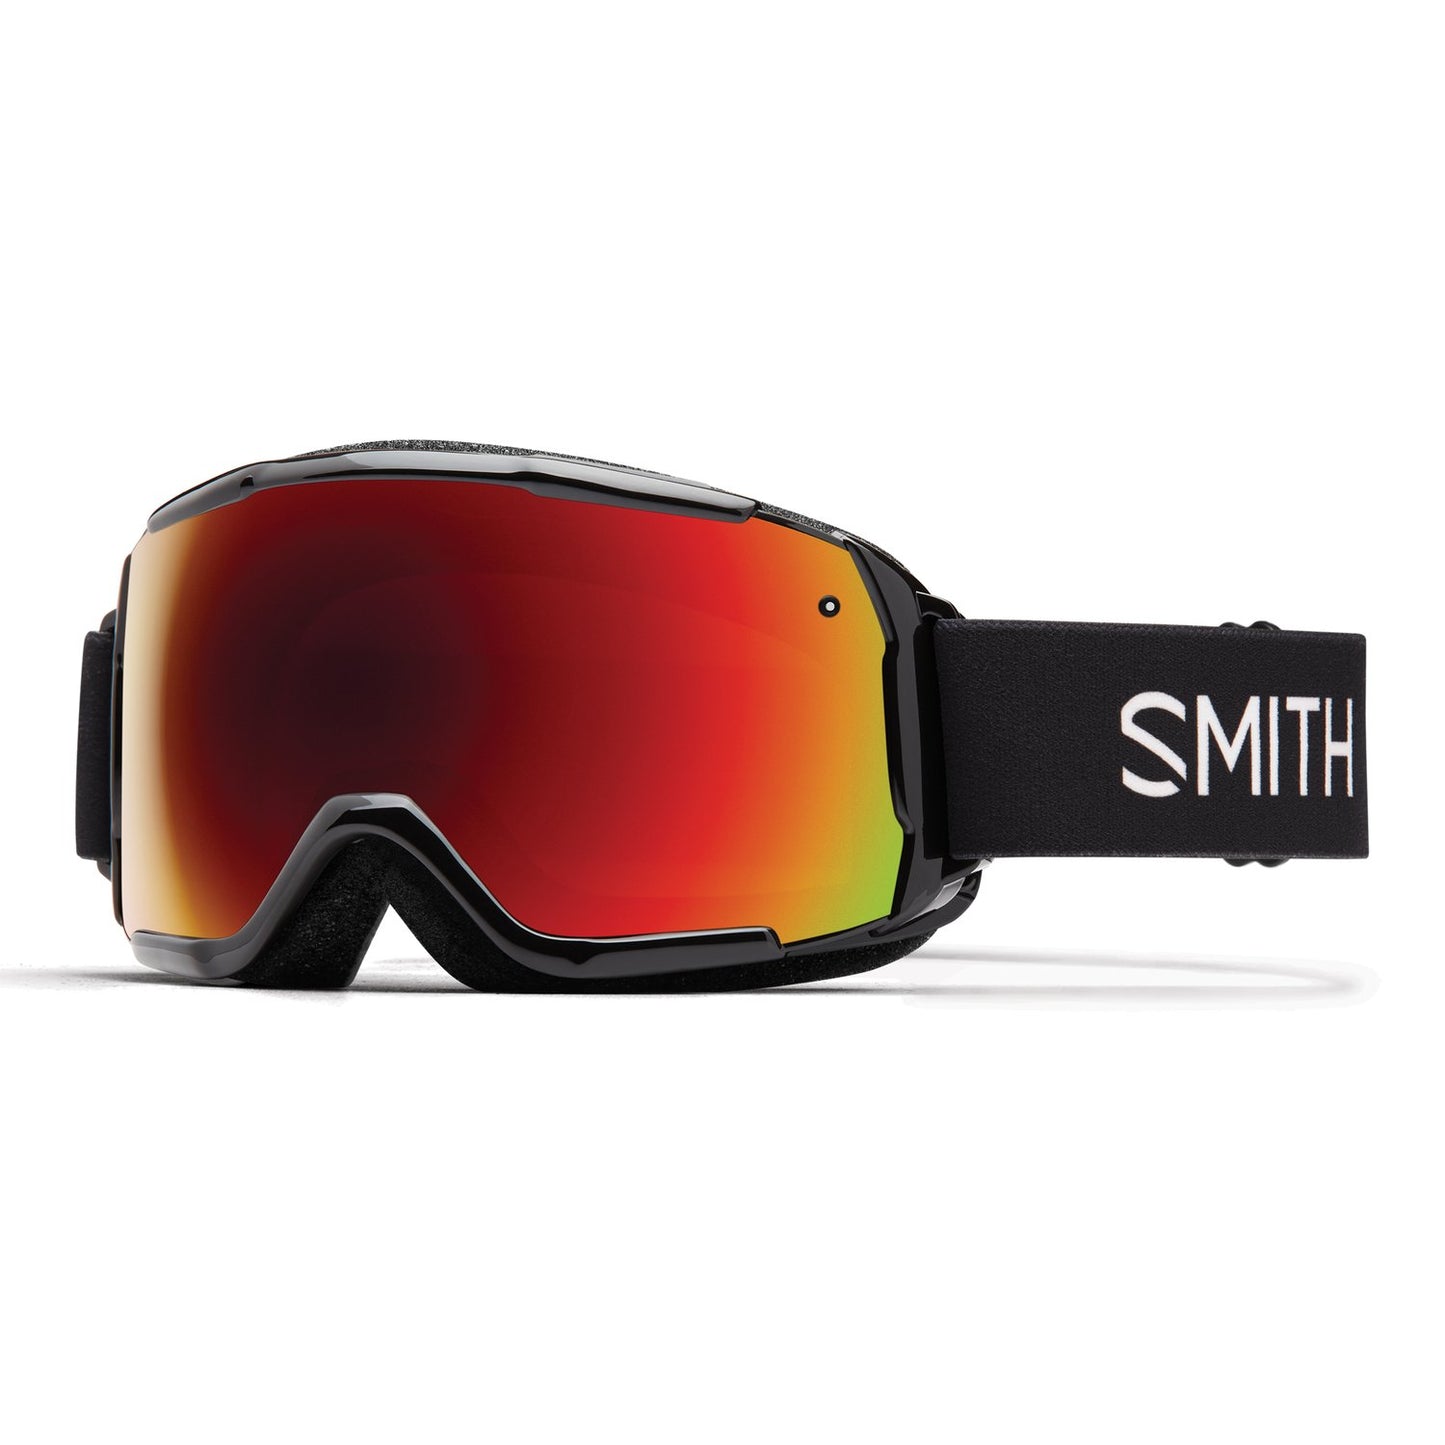 Smith Kids' Grom Snow Goggle Black / Red Sol-X Mirror Snow Goggles